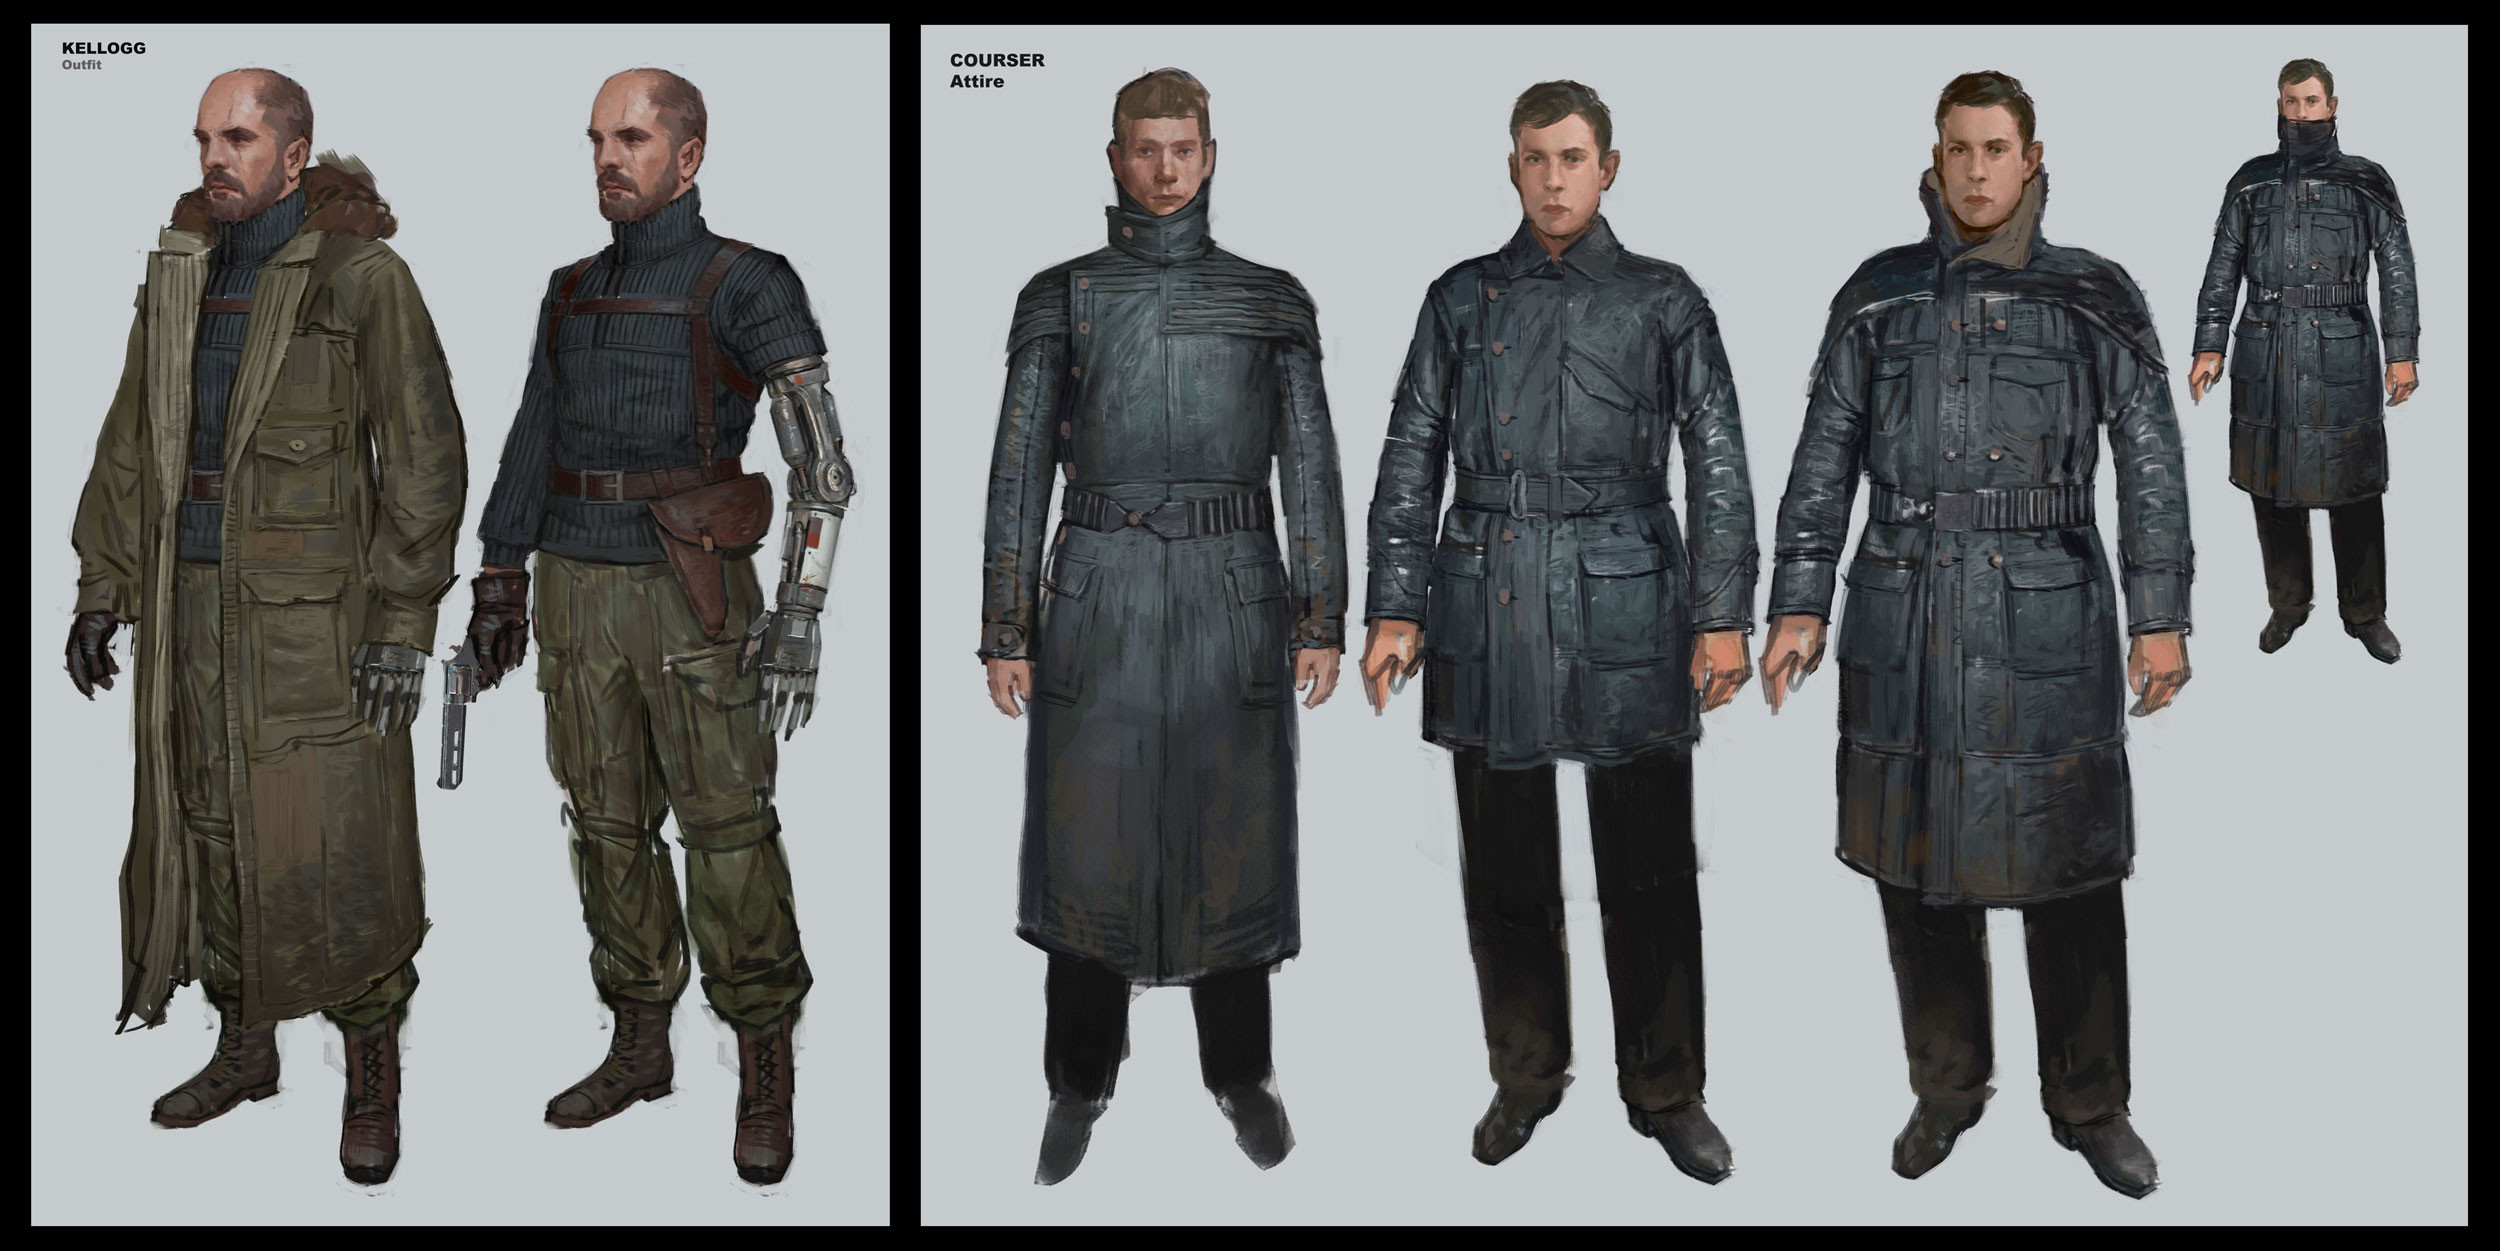 Redesign of Kellog from Fallout 4. Coursers clothing heavily inspired by Bladerunner.